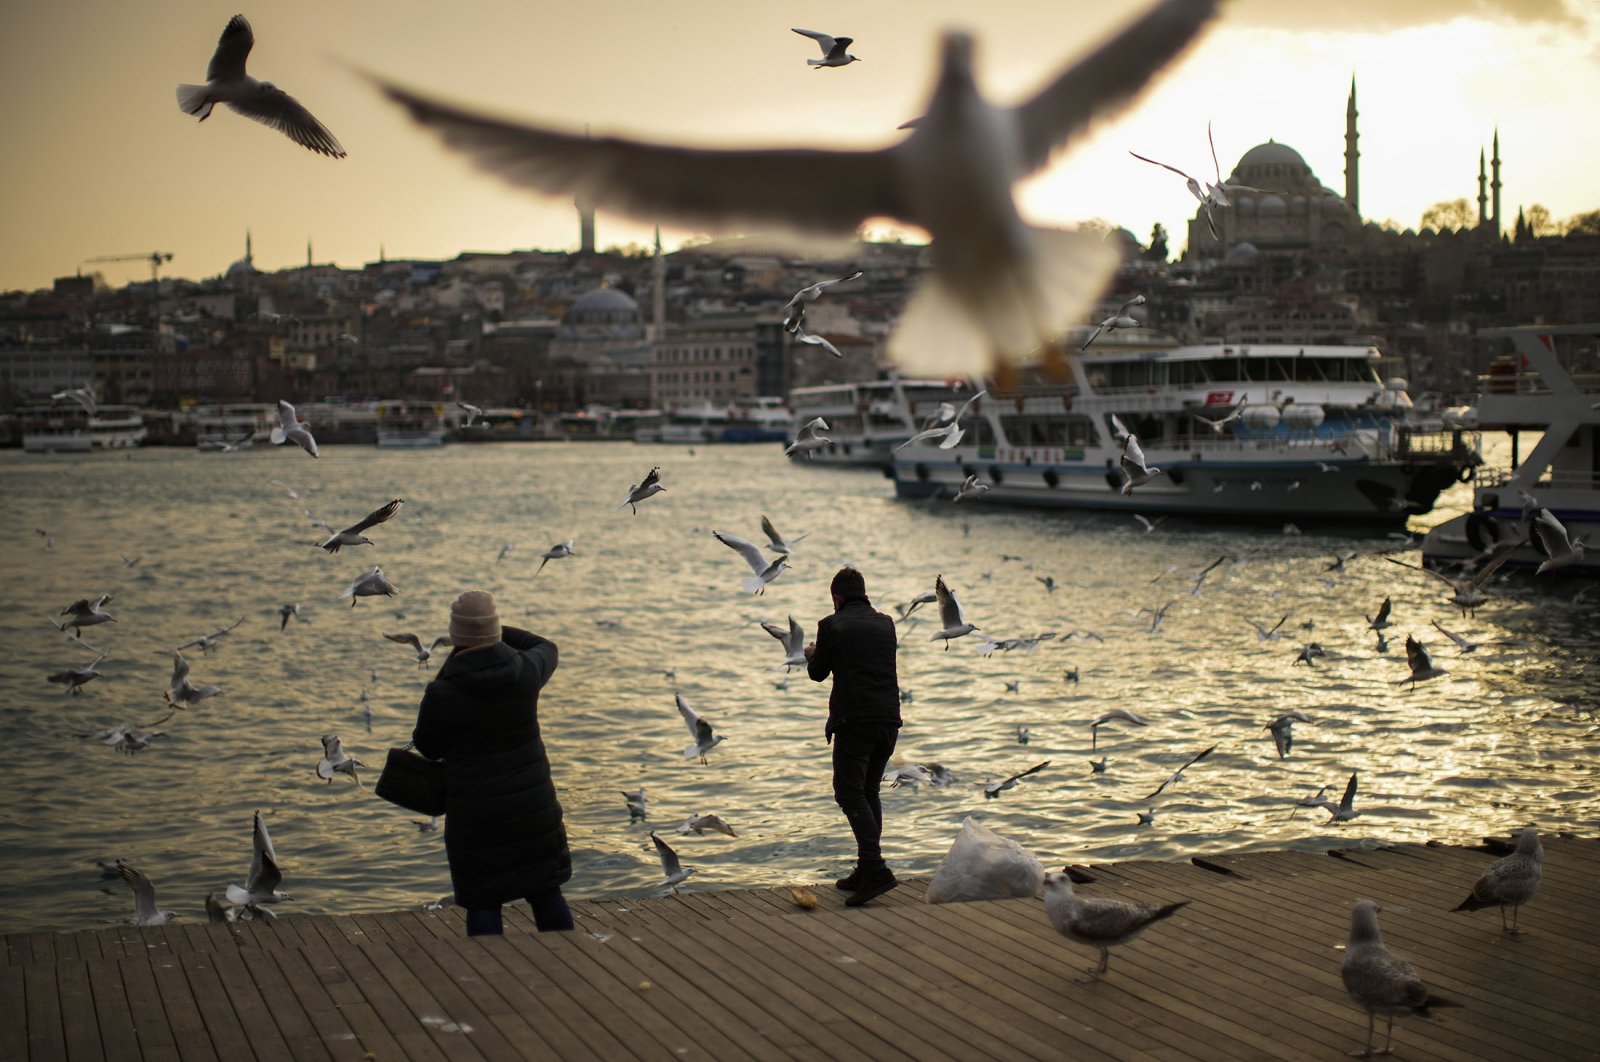 Pedestrians feed seagulls at the Golden Horn as the sun sets in Istanbul, Turkey, Jan. 19, 2022. (AP Photo)